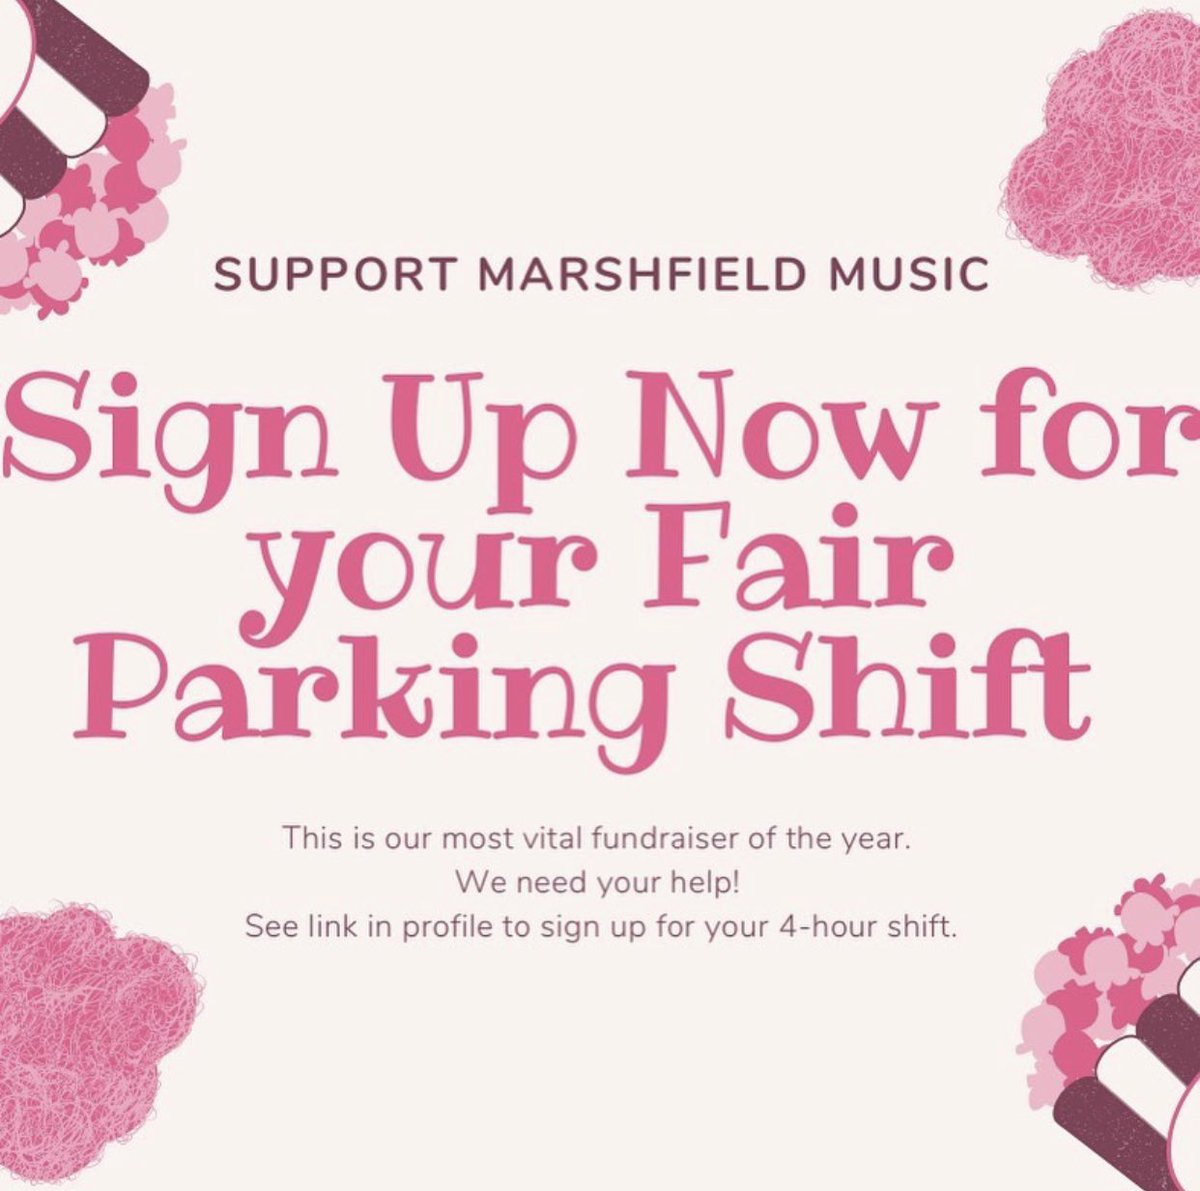 The Marshfield Fair is on August 20-29! Music students and parents...sign up for Marshfield Fair parking shifts now!!!!! linktr.ee/MarshfieldFrie… #WeRMarshfieldMusic #WeRMarshfield #MHSVocals #MusicFundraiser